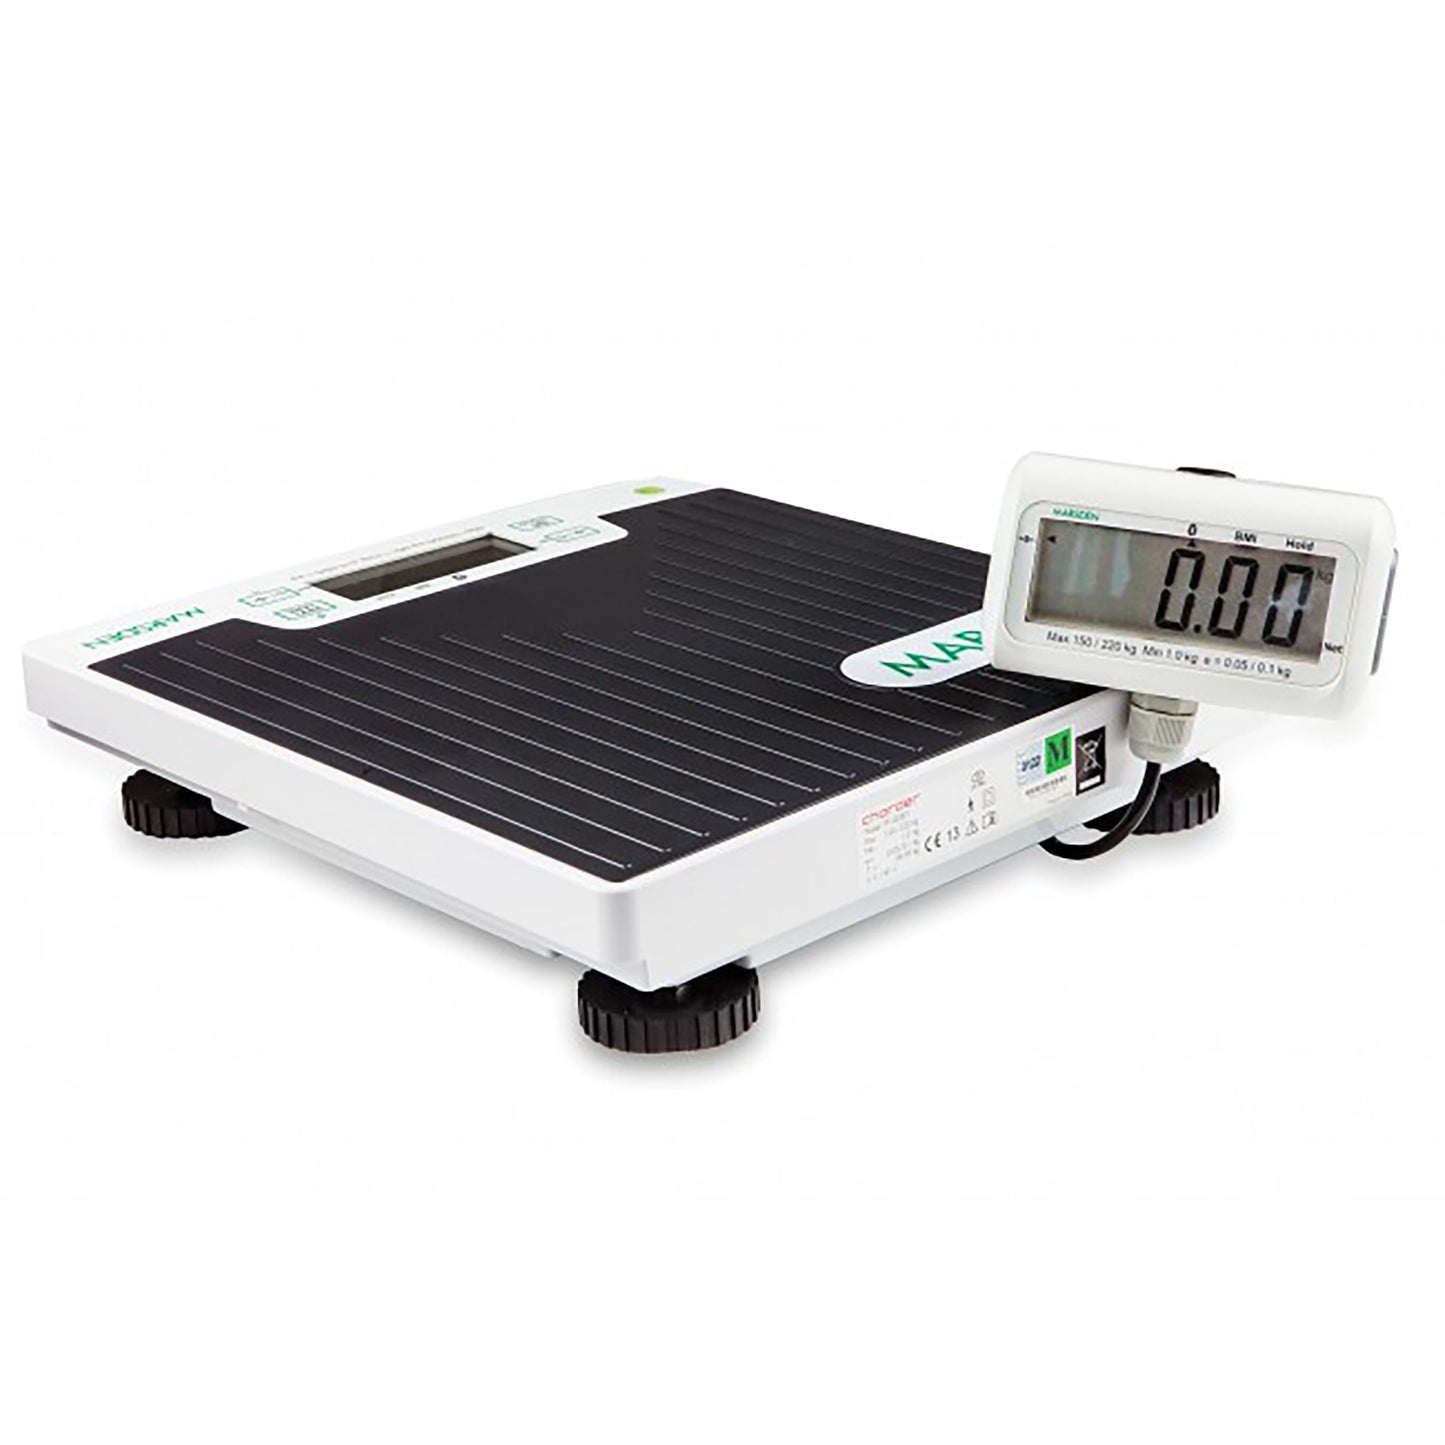 Marsden - High Capacity Portable Floor Scale with Dual Display - Approved